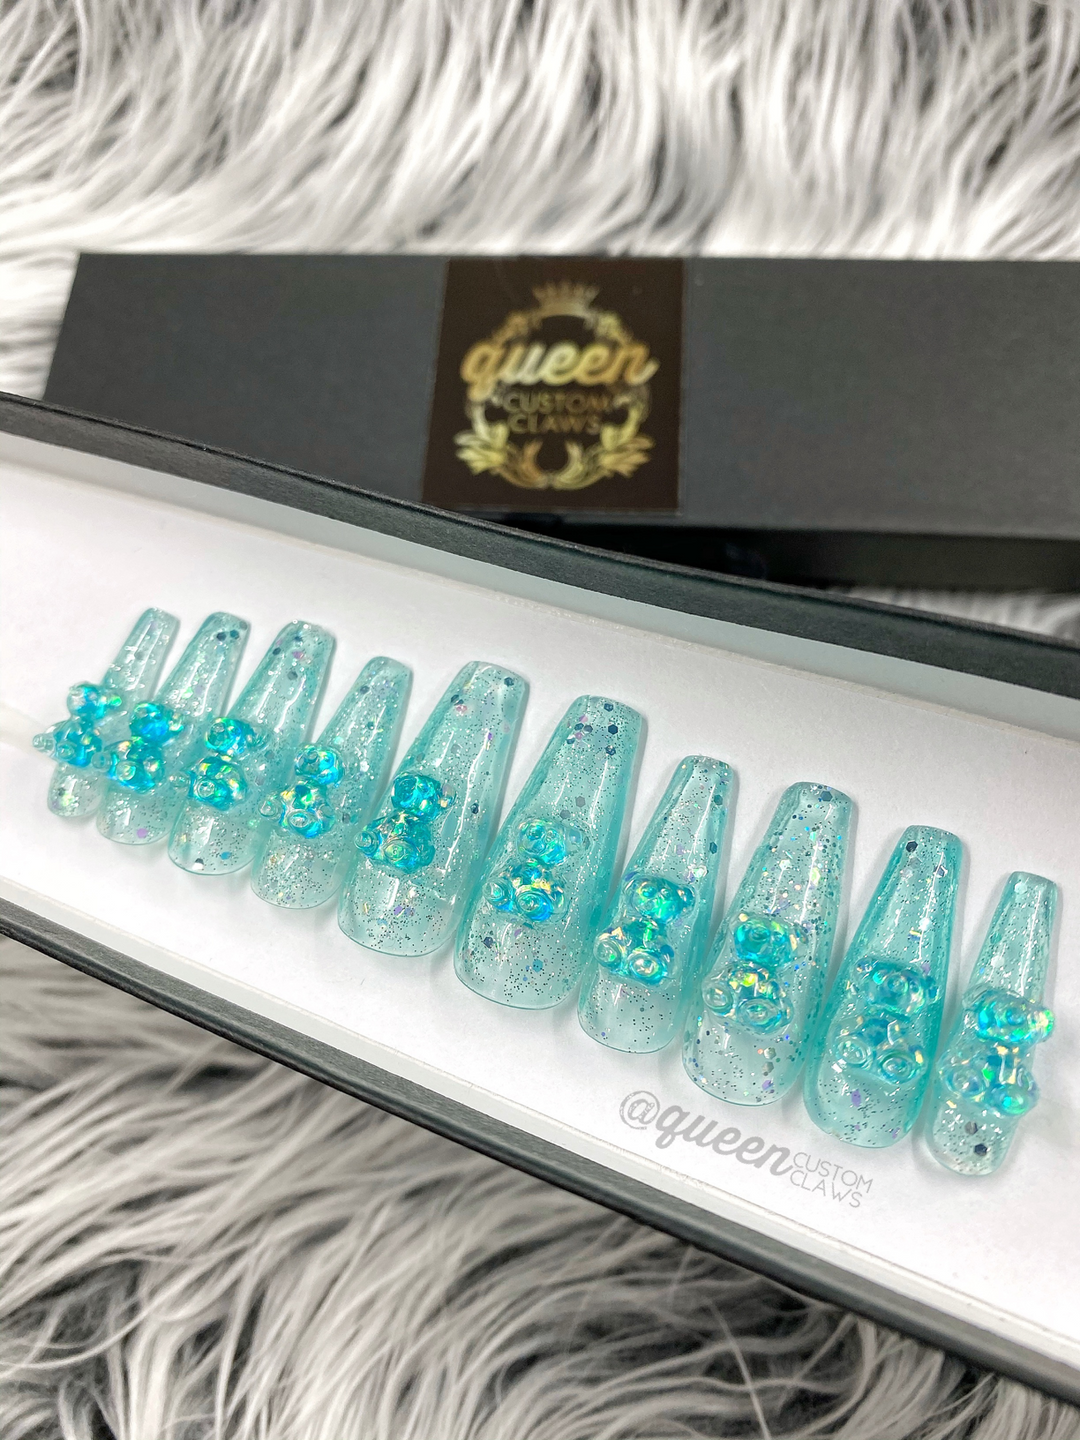 Jelly Bears - clear jelly press on nails